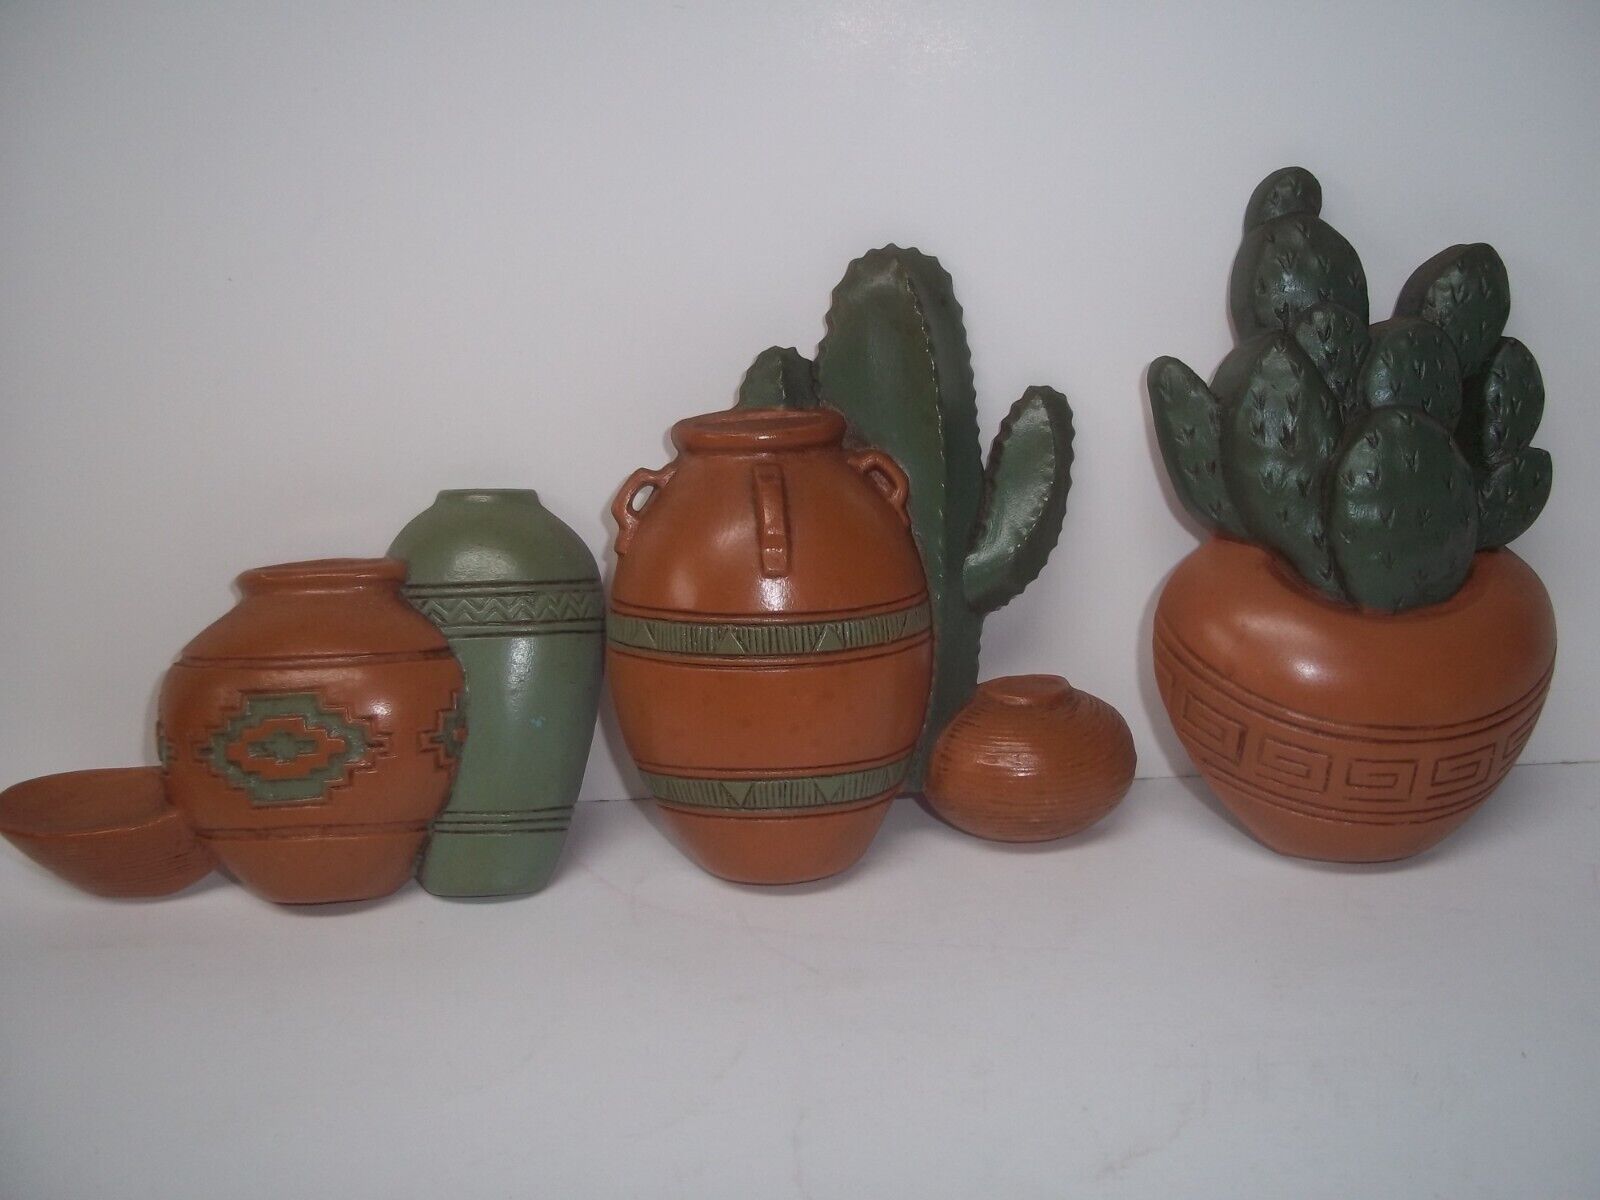 VINTAGE BURWOOD 3 Pc. SOUTHWEST WALL HANGINGS CACTUS POTS WALL DECOR MADE in USA